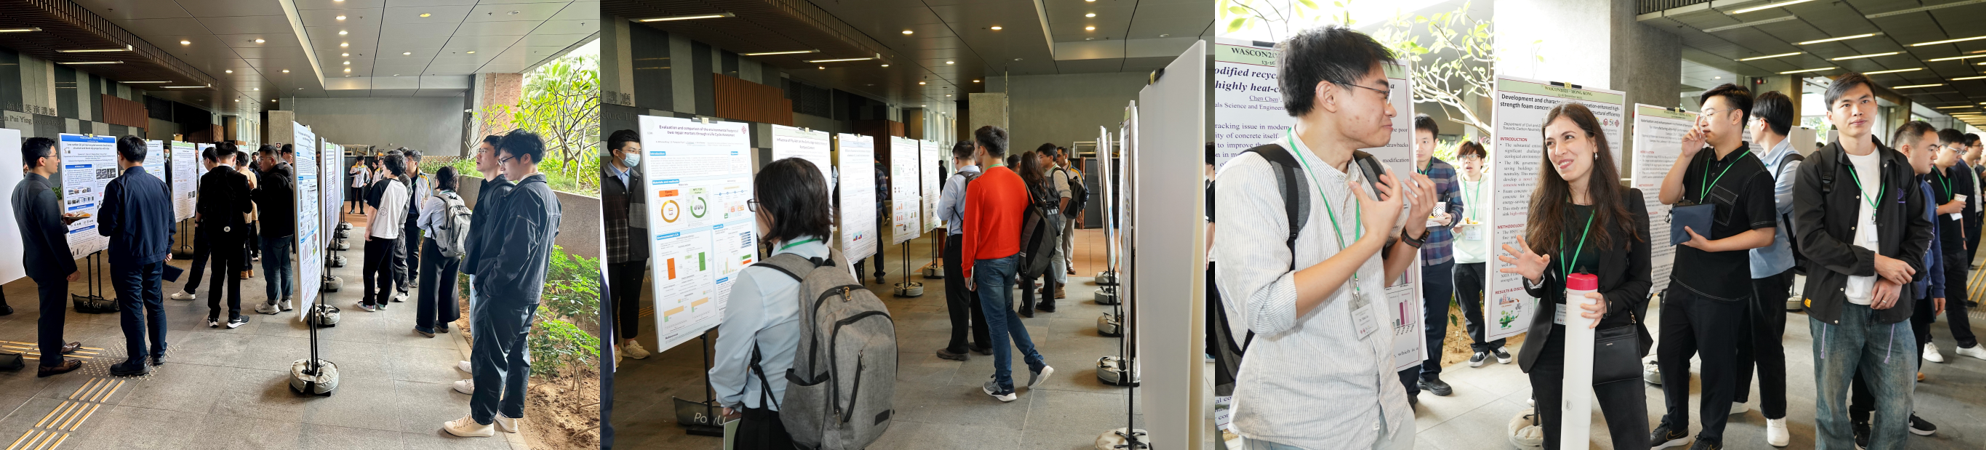 Poster_Session